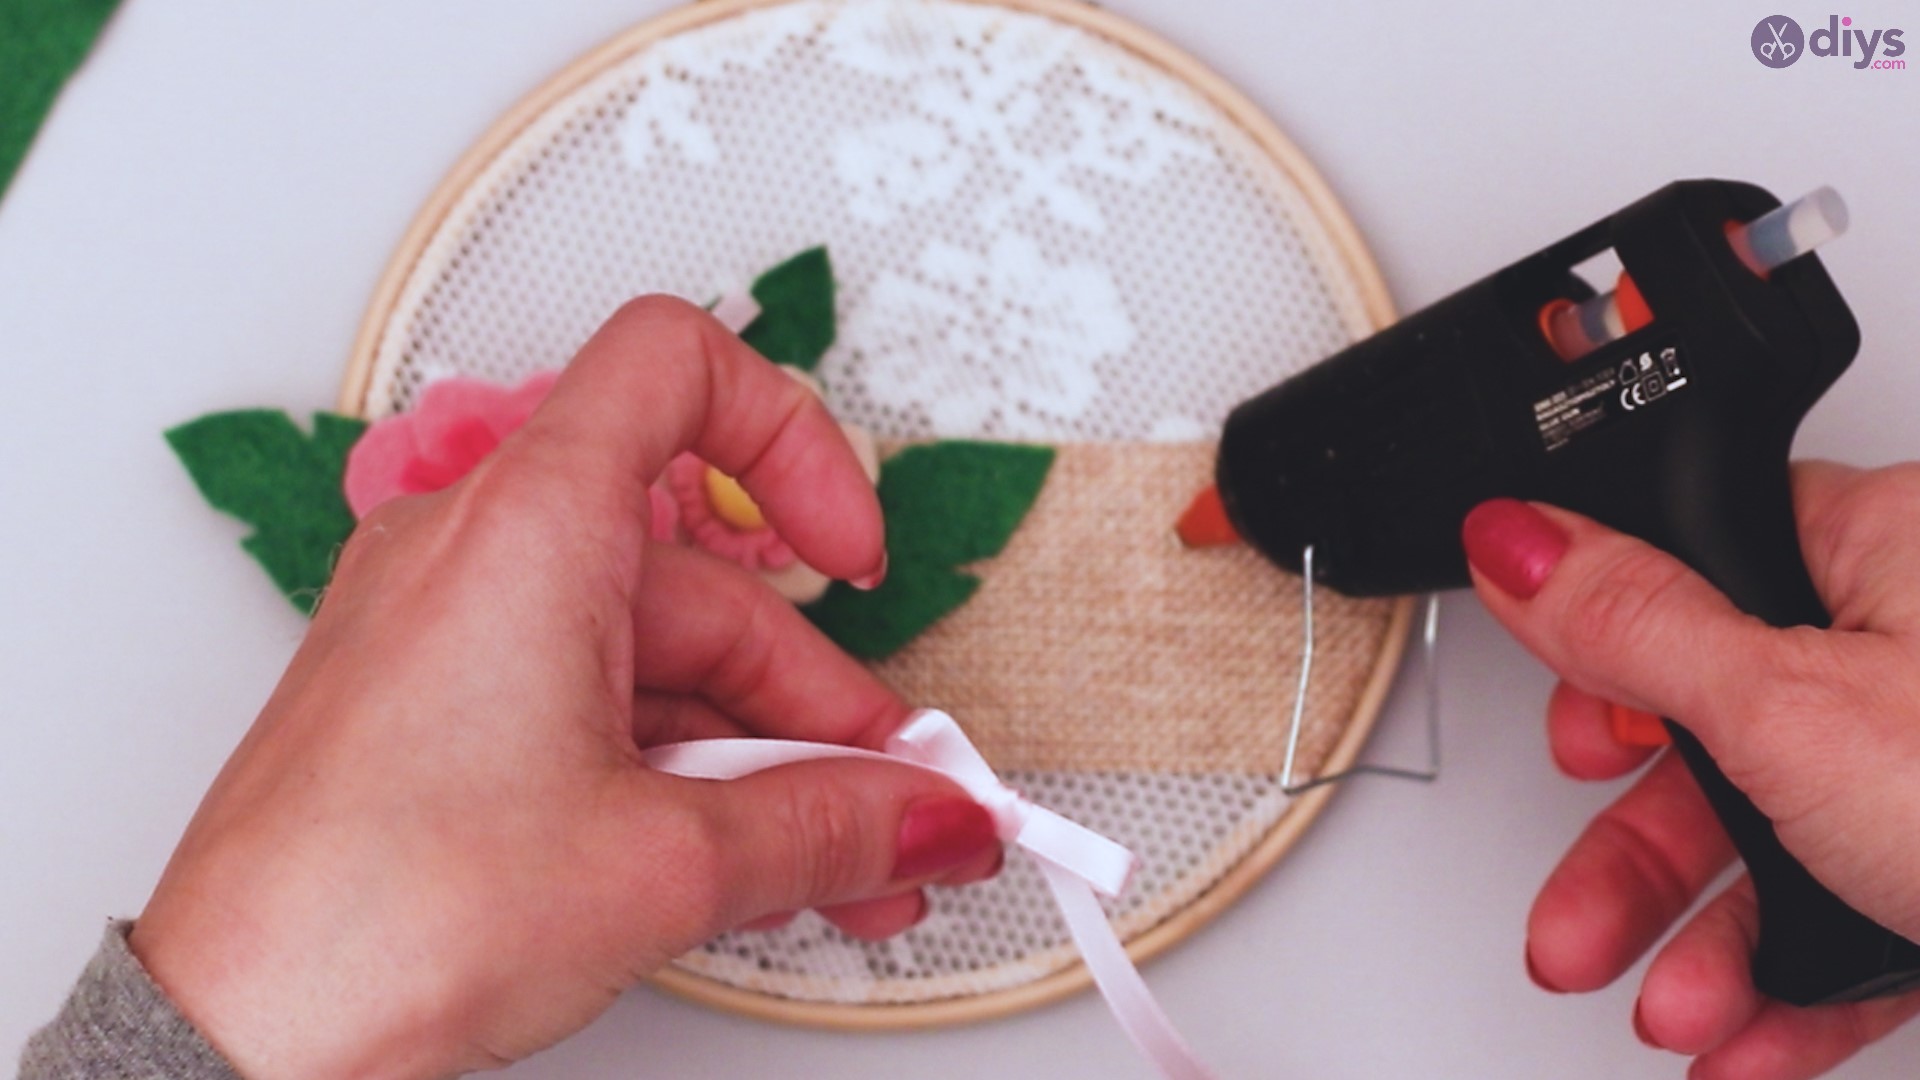 Diy embroidery hoop wall decor tutorial step by step (69)